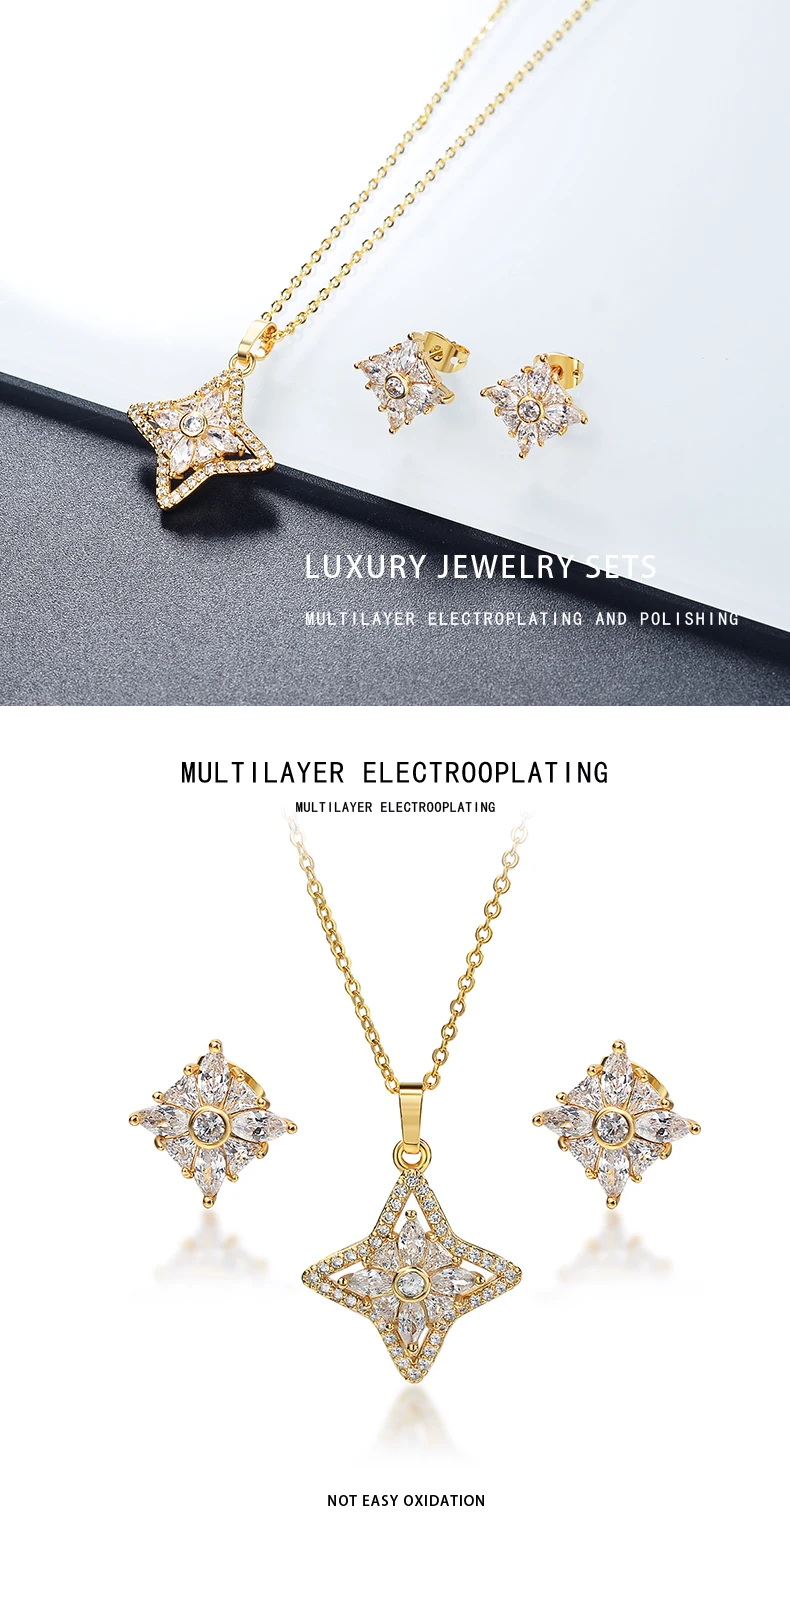 50% Discount Gold Necklace Jewelry Sets Gold Plated Earrings Crystal Jewelry For Ladies